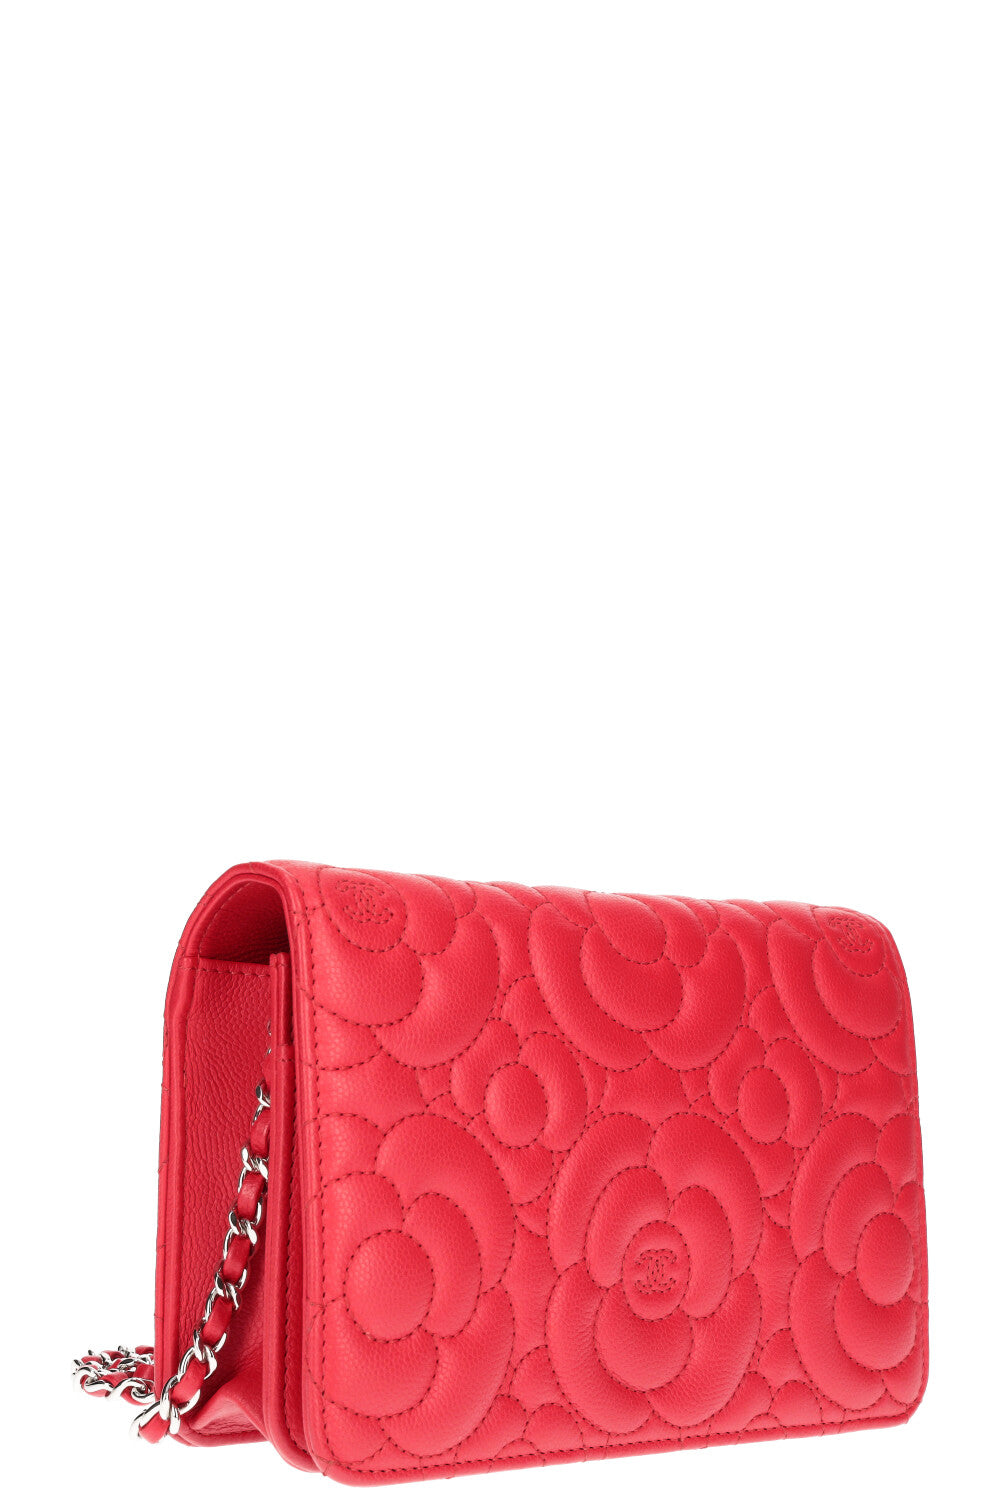 Chanel Quilted Glitter Wallet on Chain Red  DAC